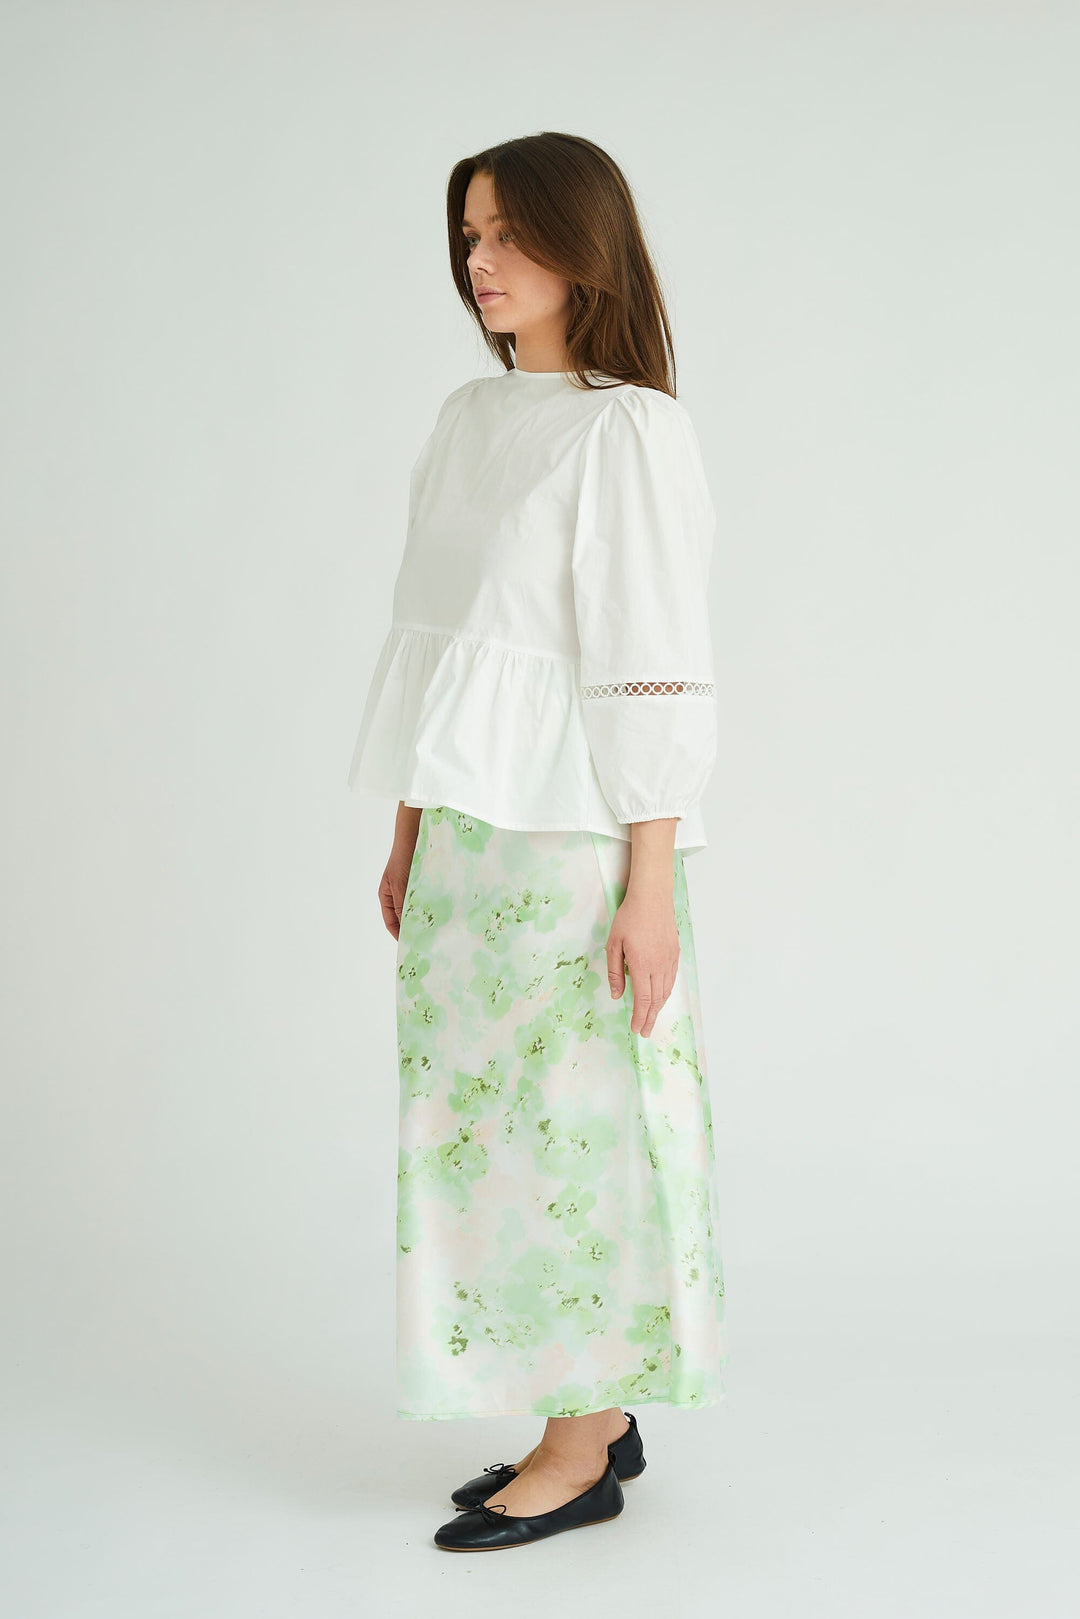 A-View - Kamille Blouse - 000 White Bluser 